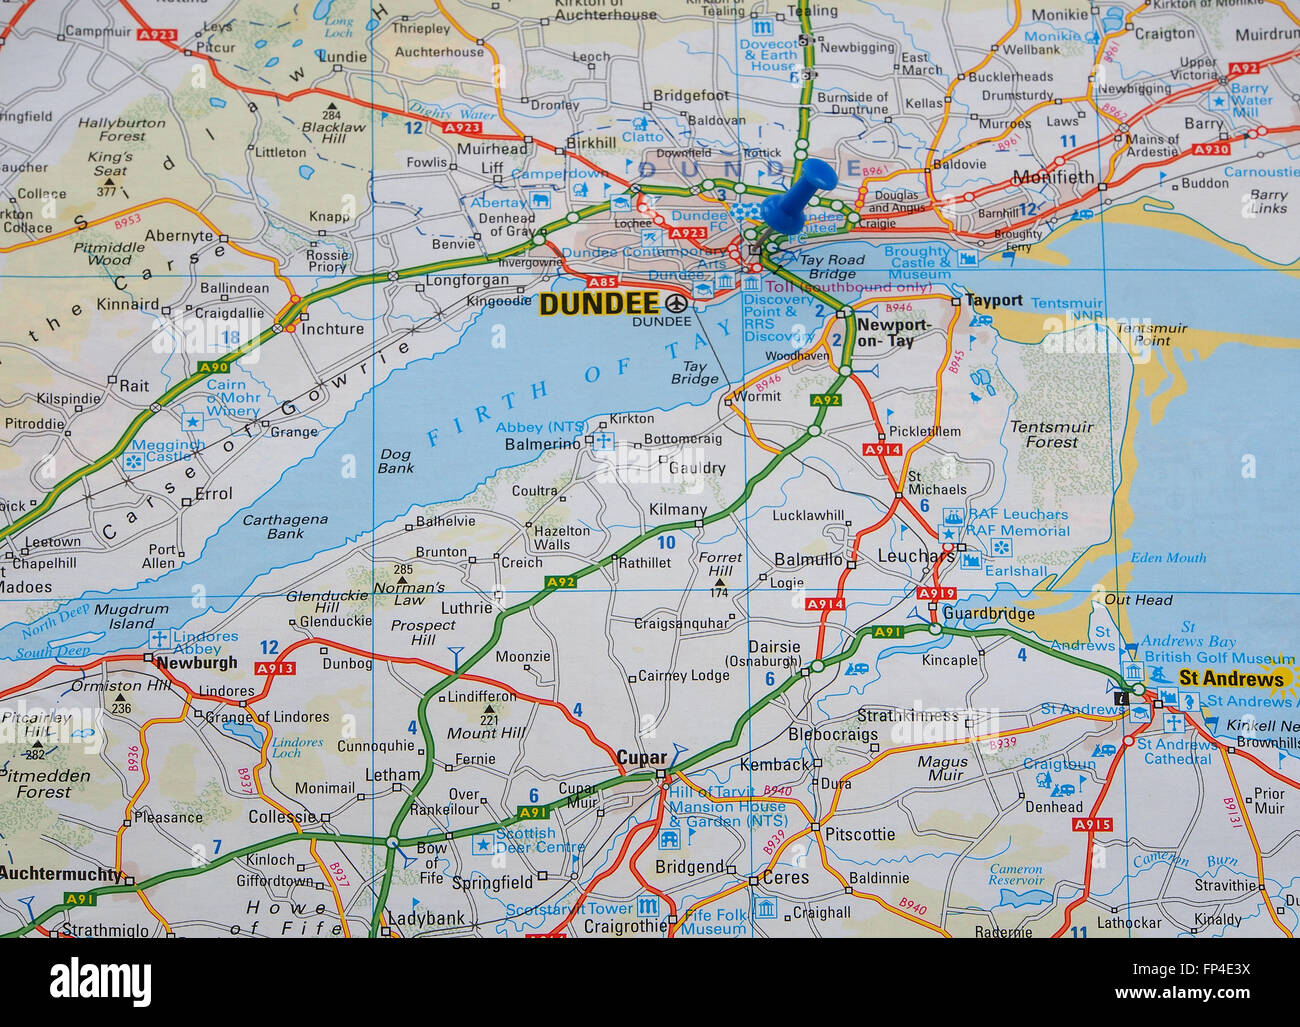 Road Map Of Scotland Showing The Dundee Area And With A Map Pin In FP4E3X 